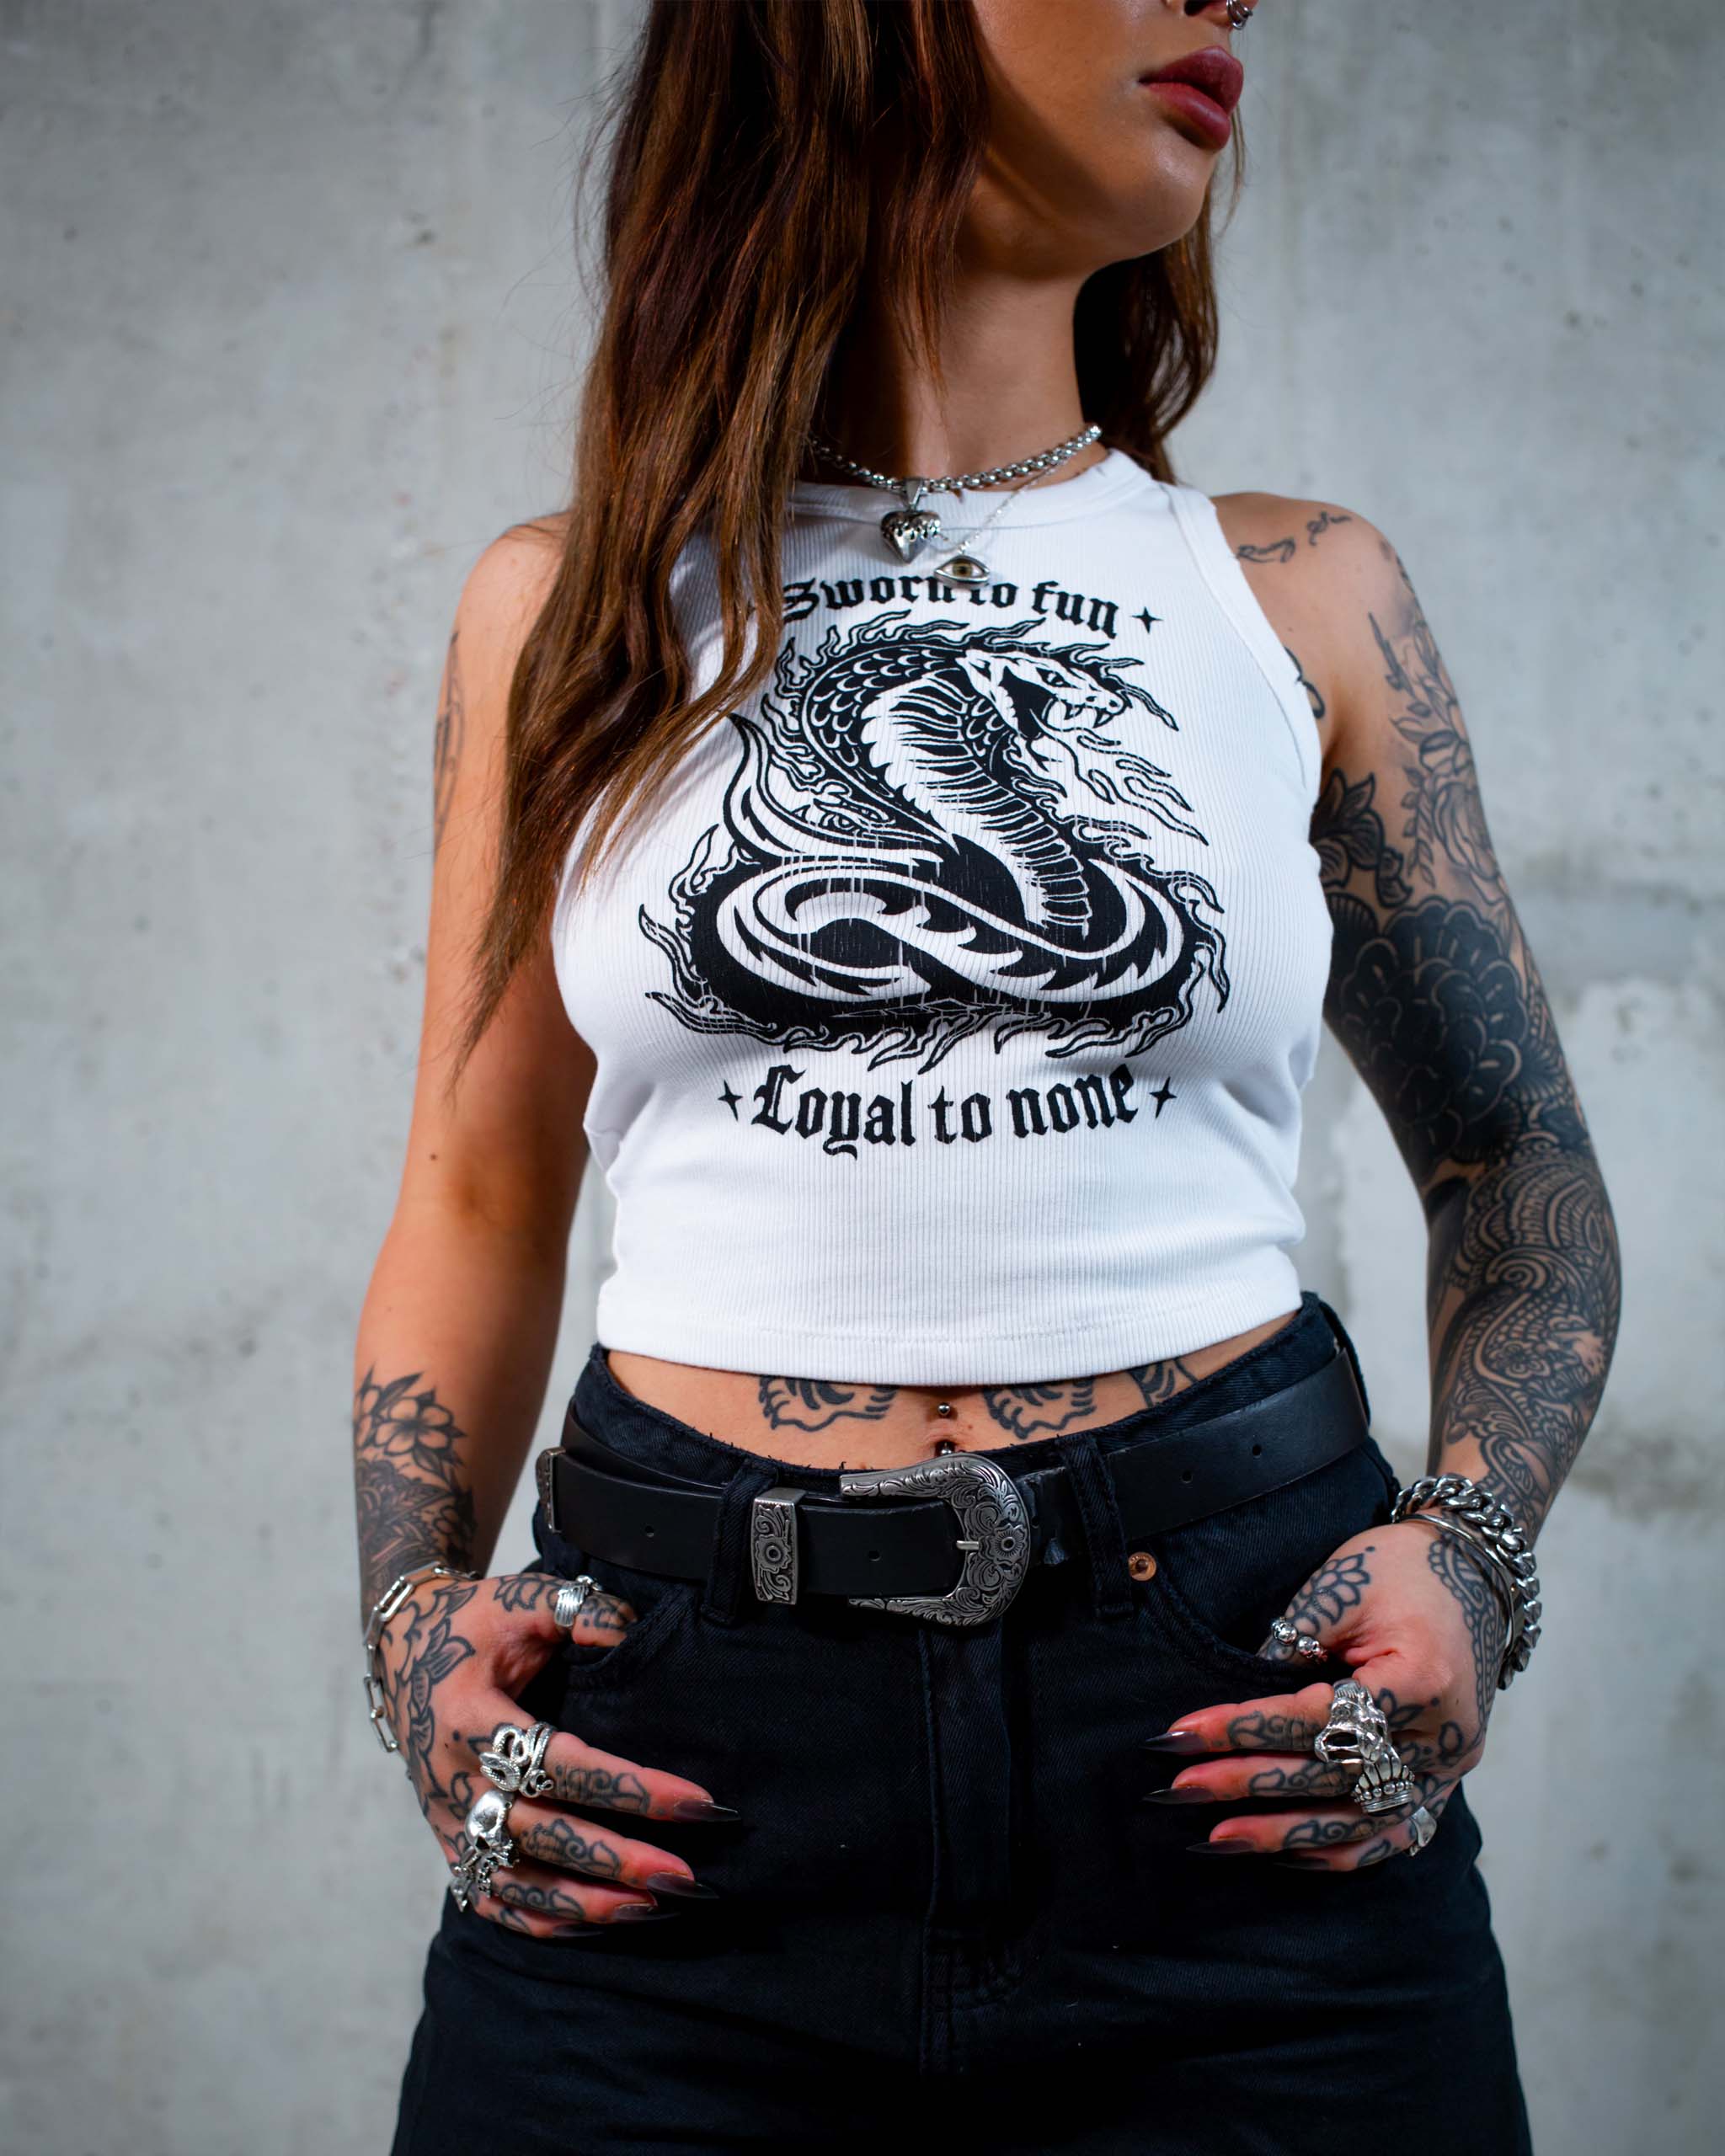 The Sworn to Fun cobra tank top by Sleazy Rider, featuring a tattoo style cobra graphic.